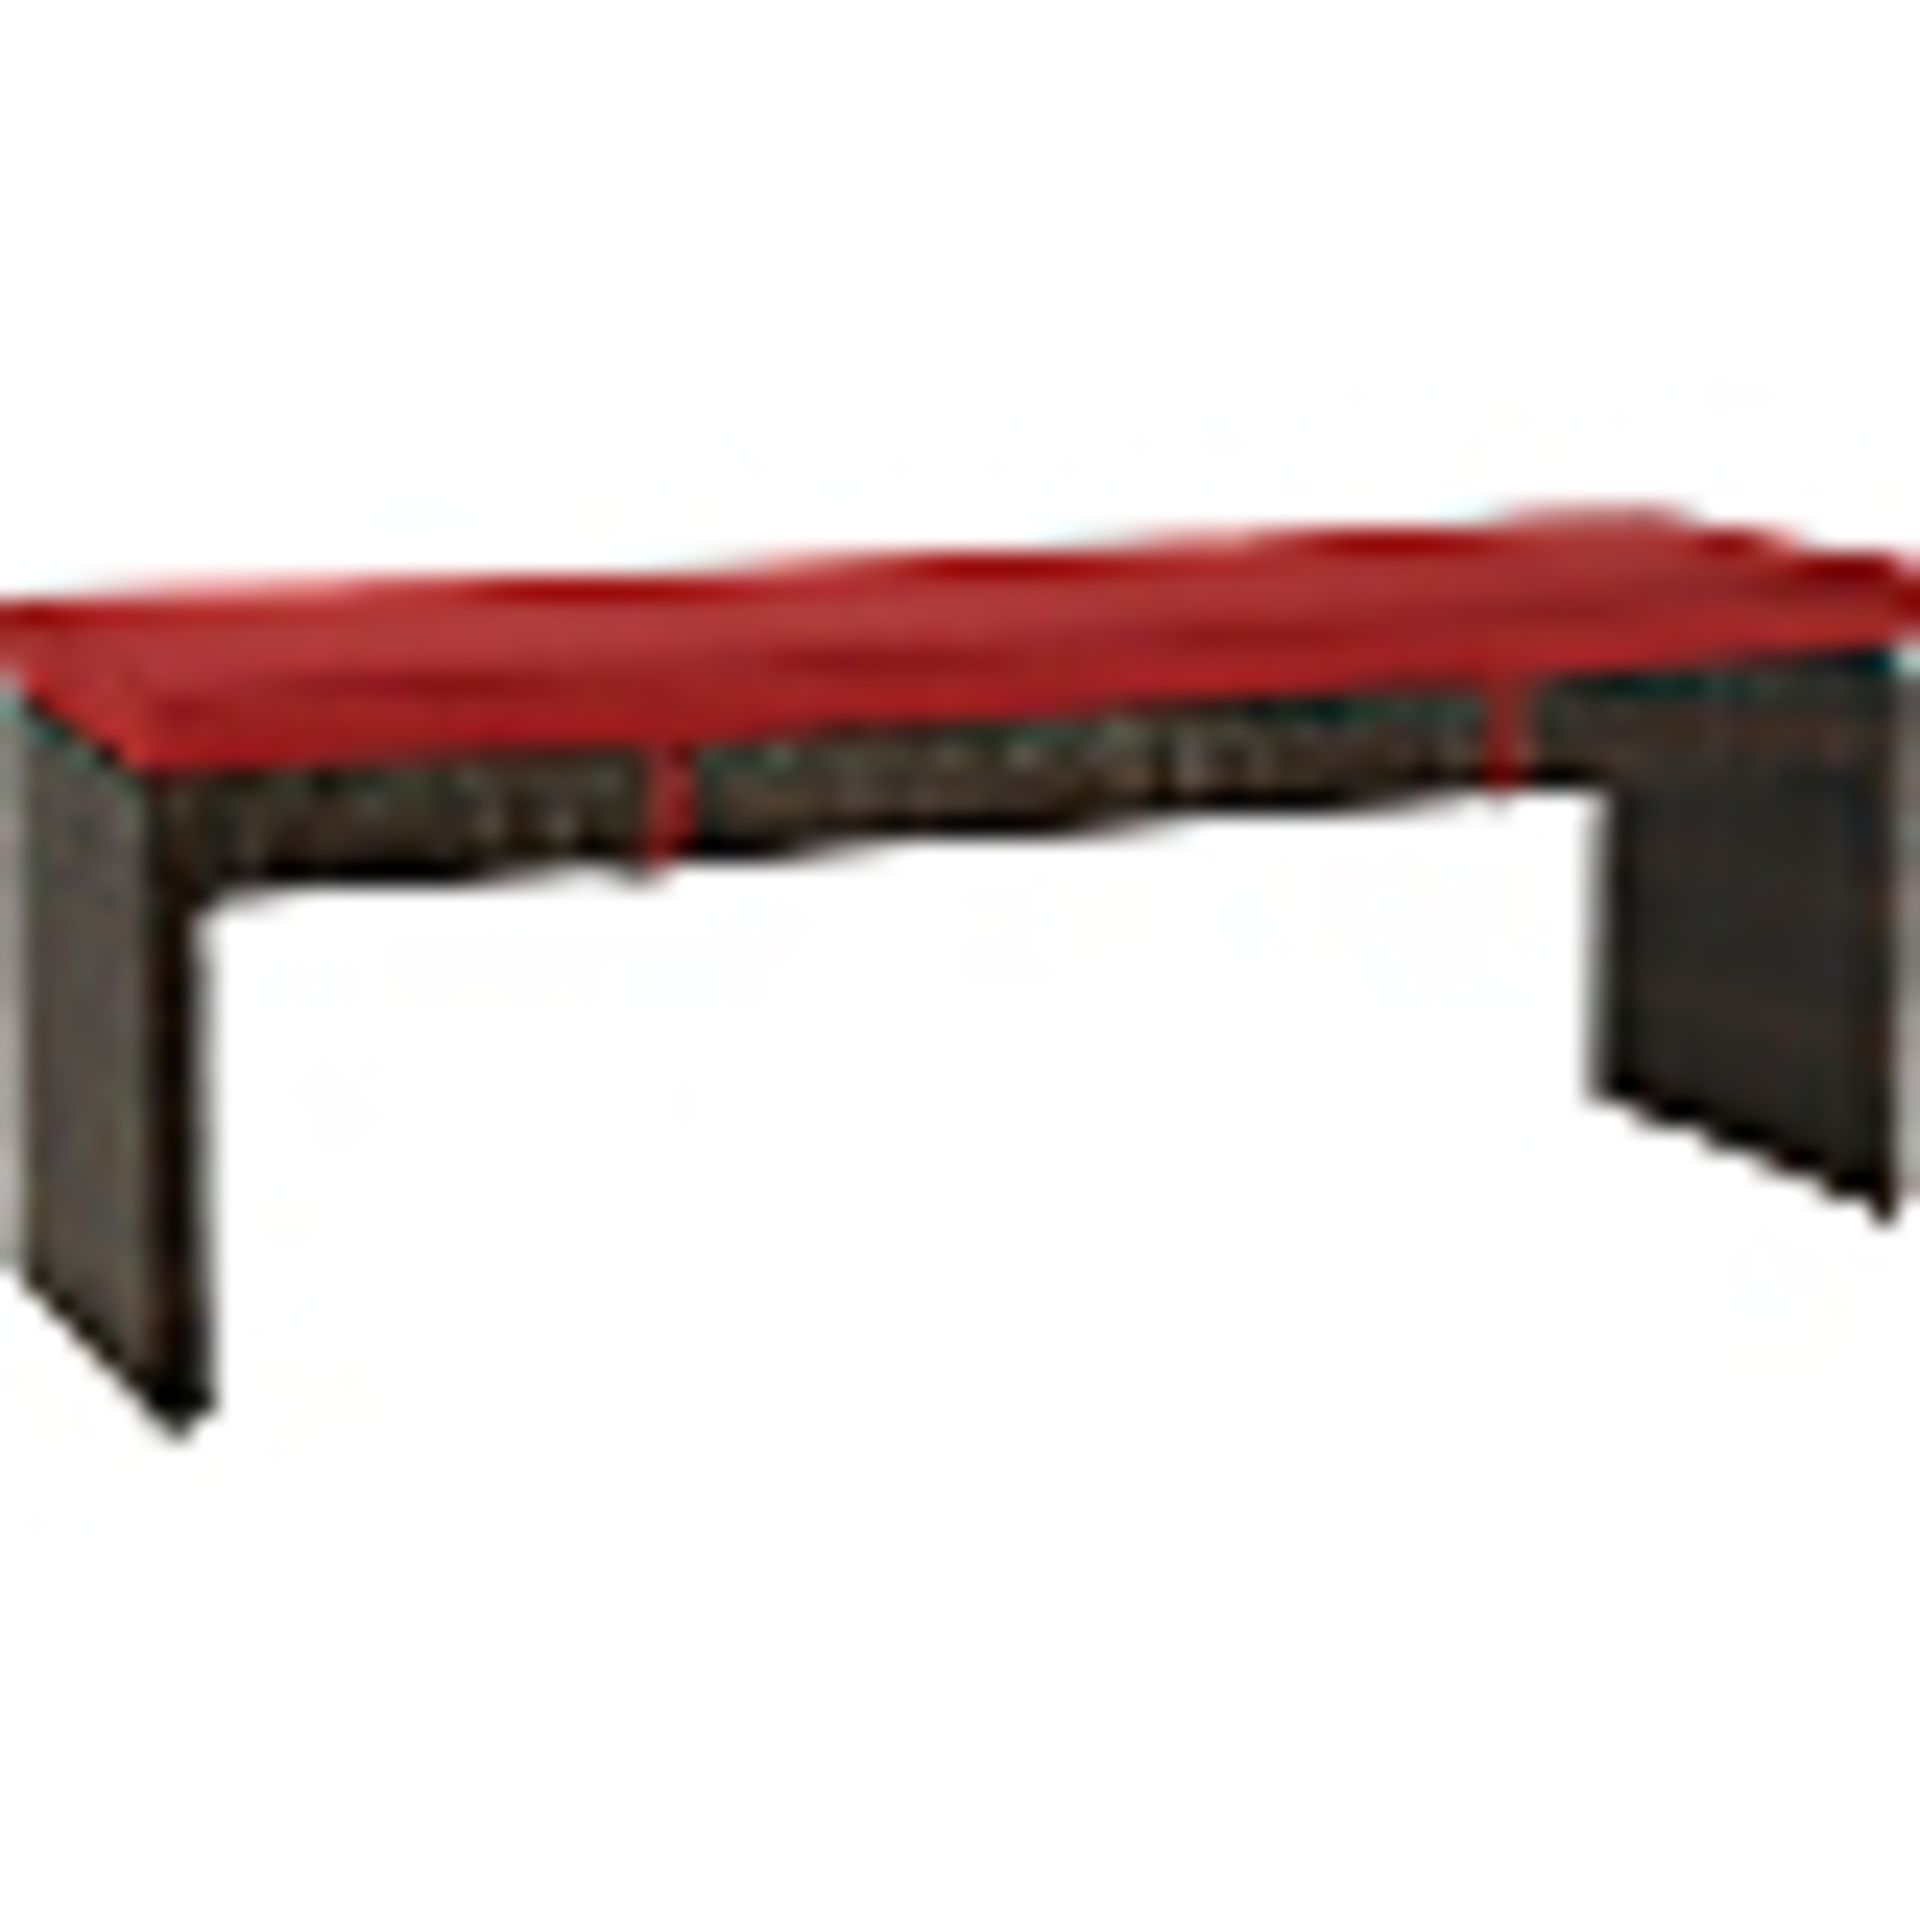 Jakarta 3pc deluxe bench dining set, red colour. New and boxed. See picture for design. RRP £329. - Image 3 of 7